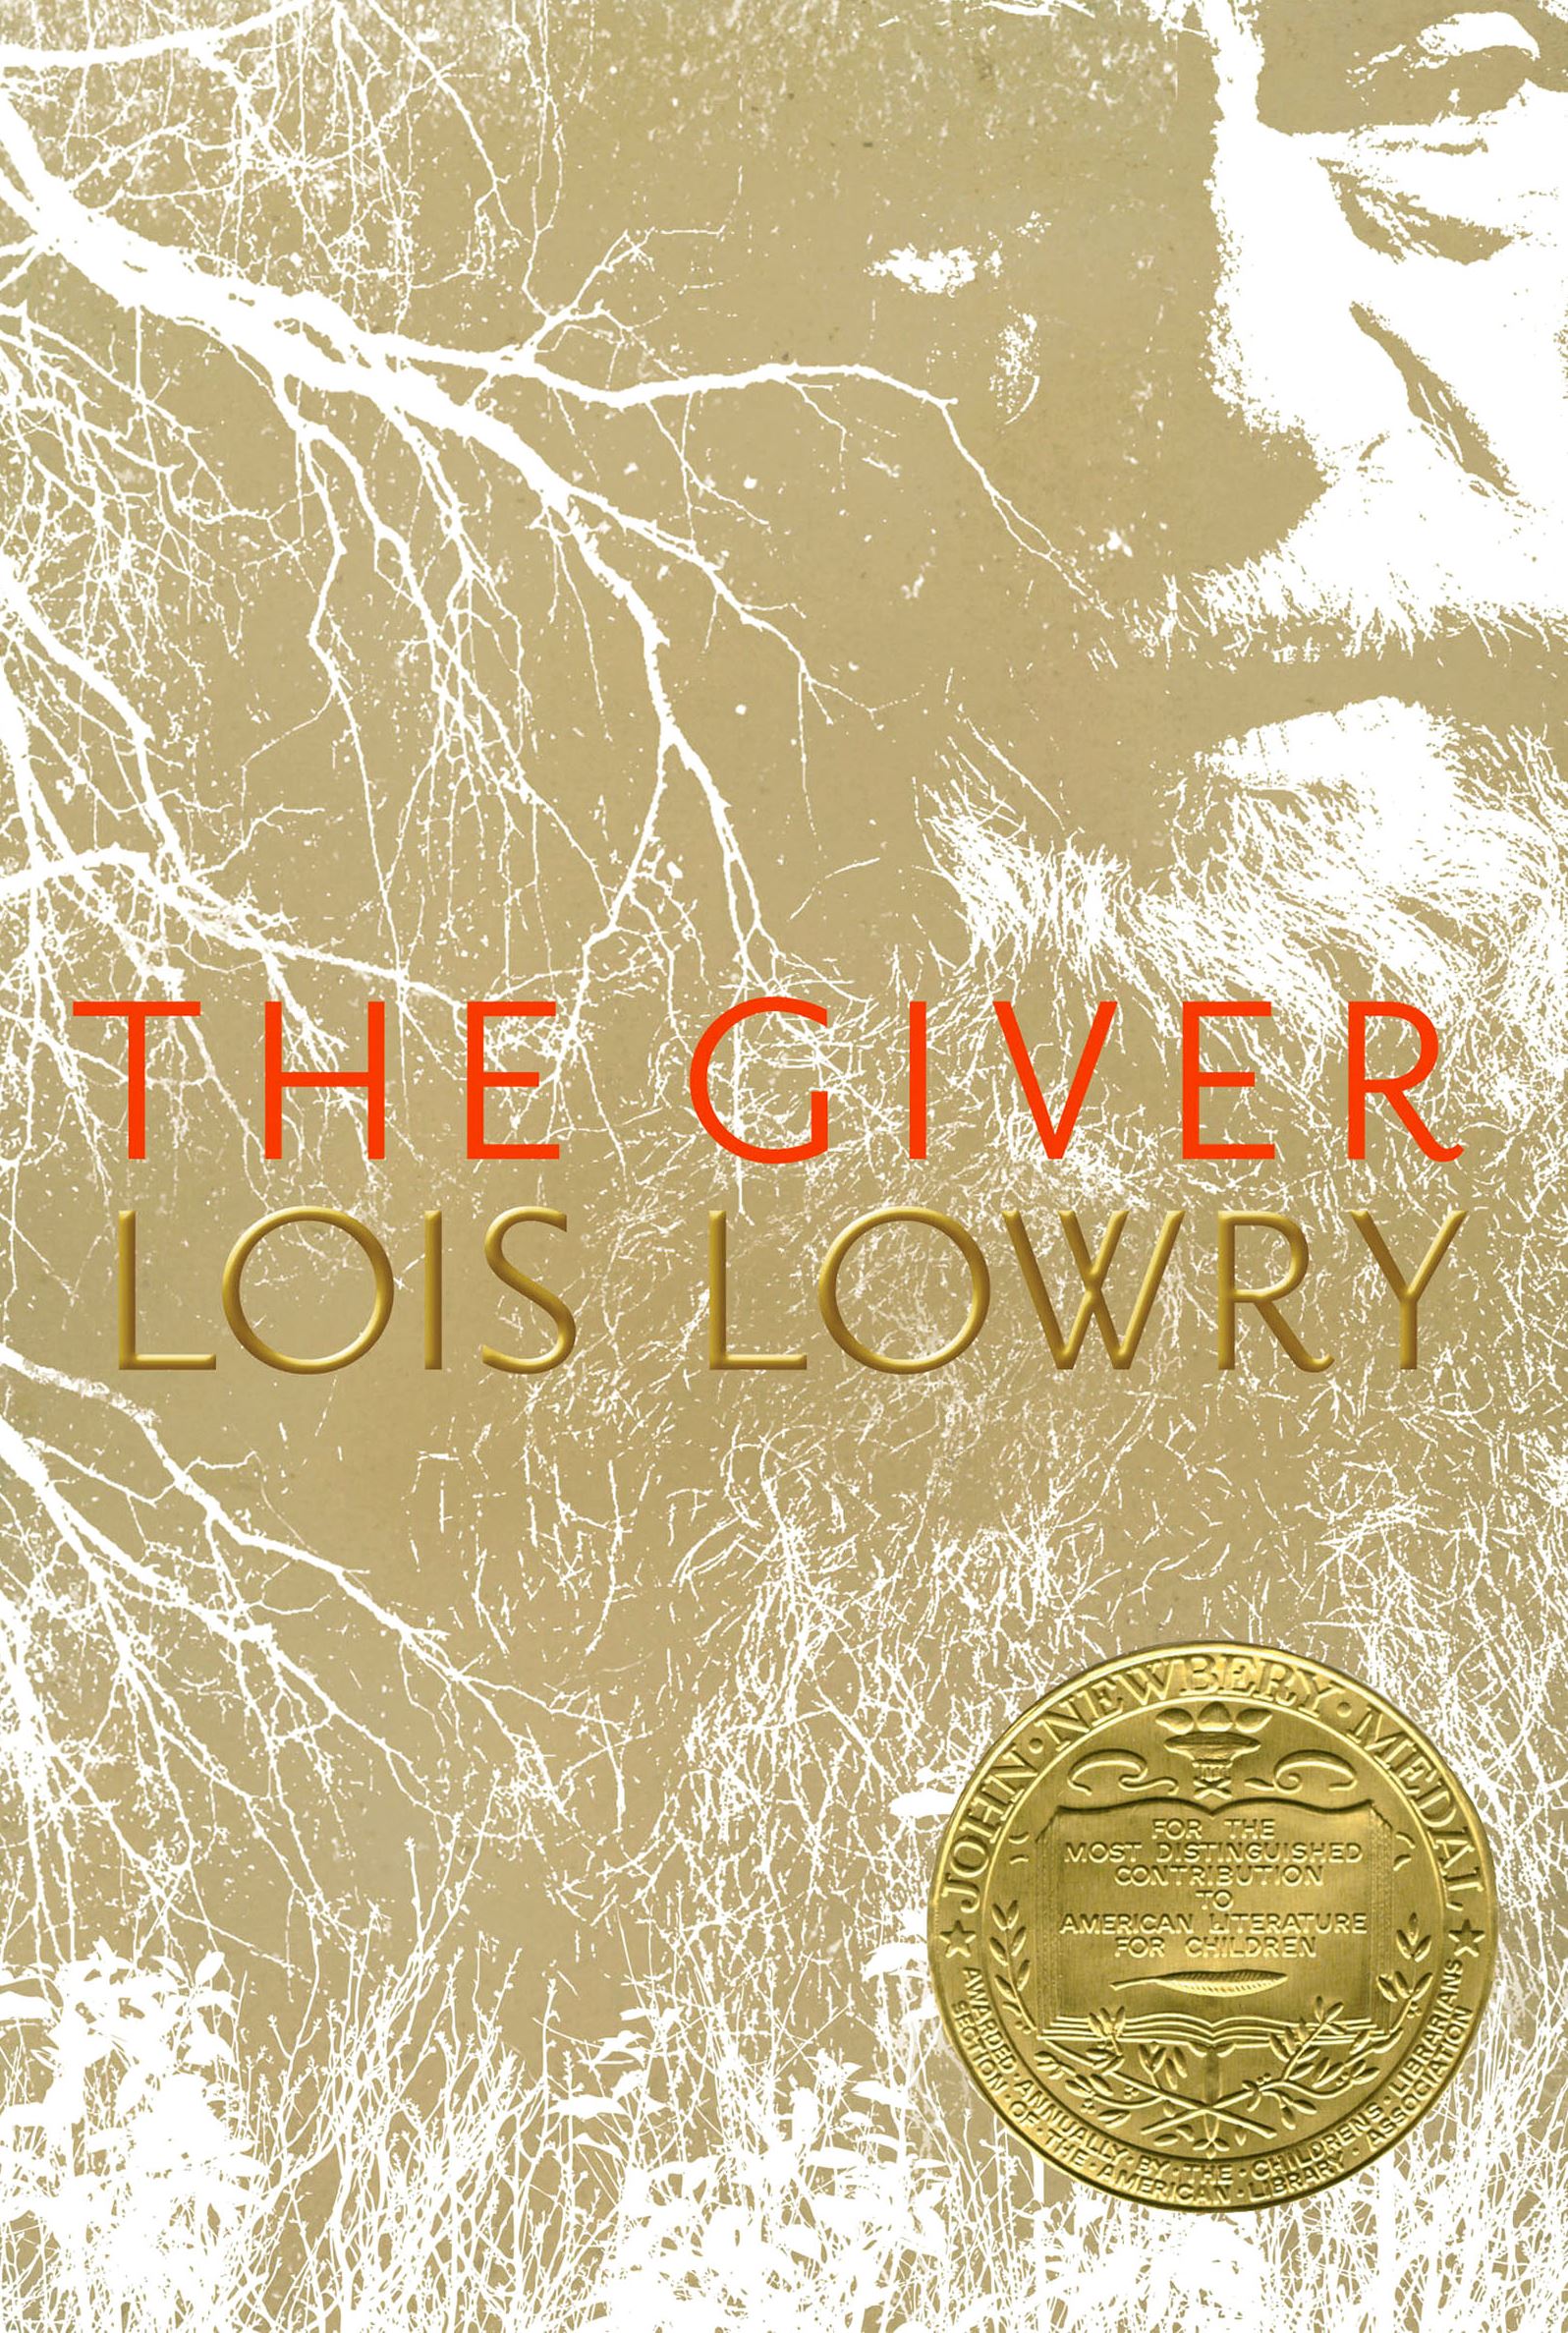 The Giver Foreshadowing Analysis